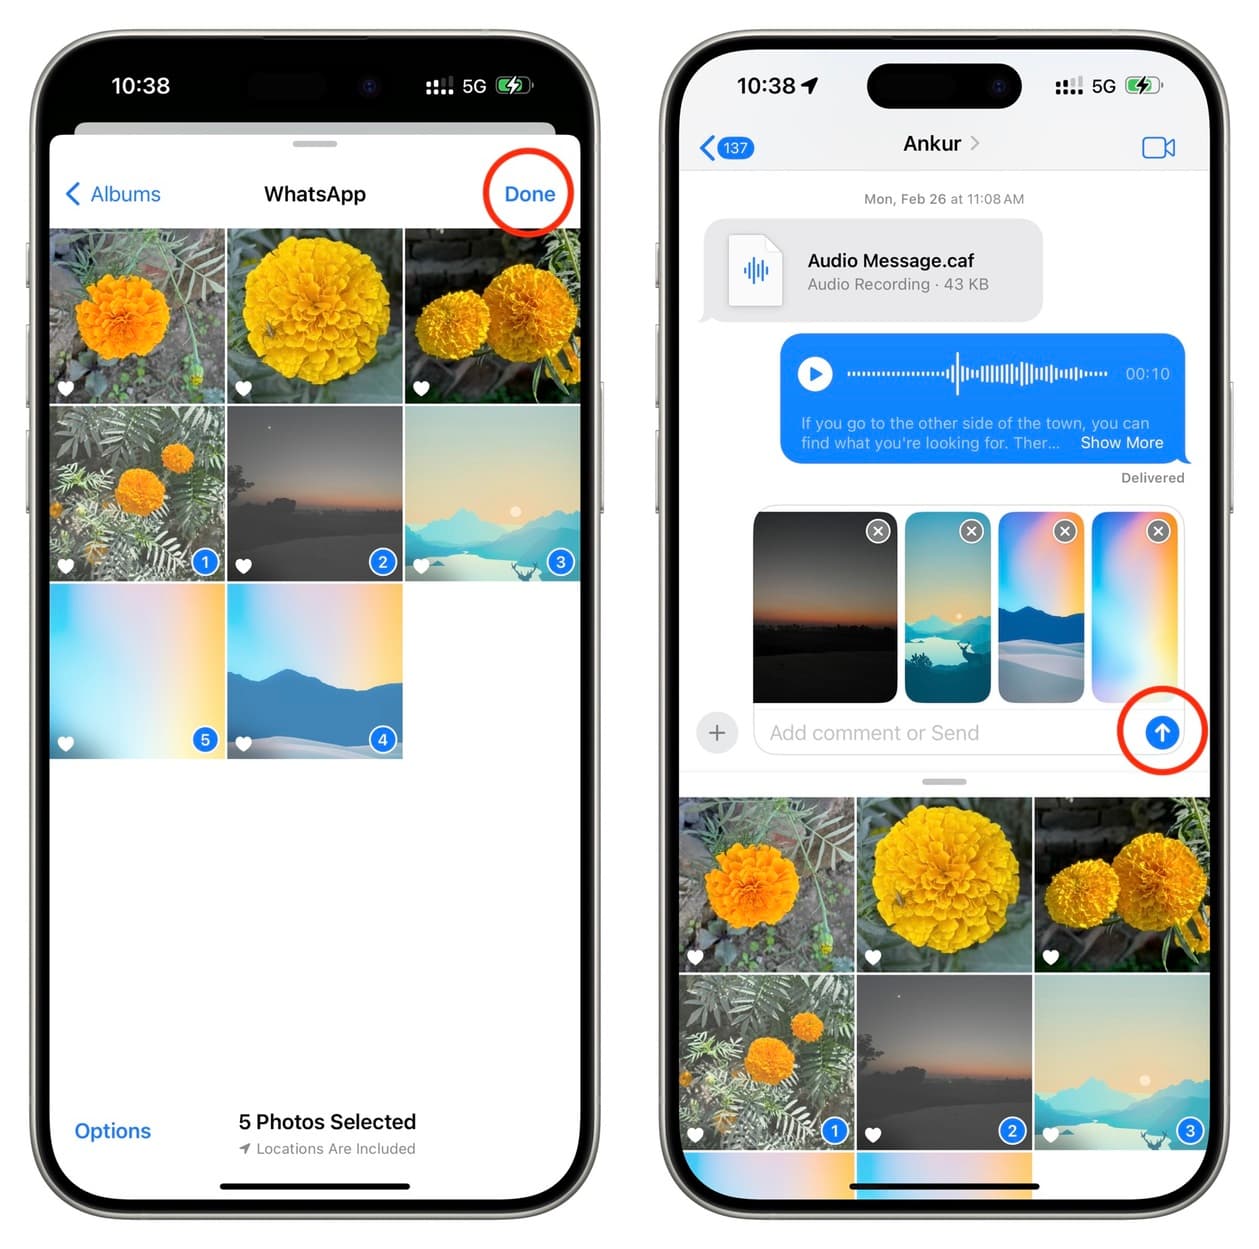 Select photos and tap send button in iPhone Messages